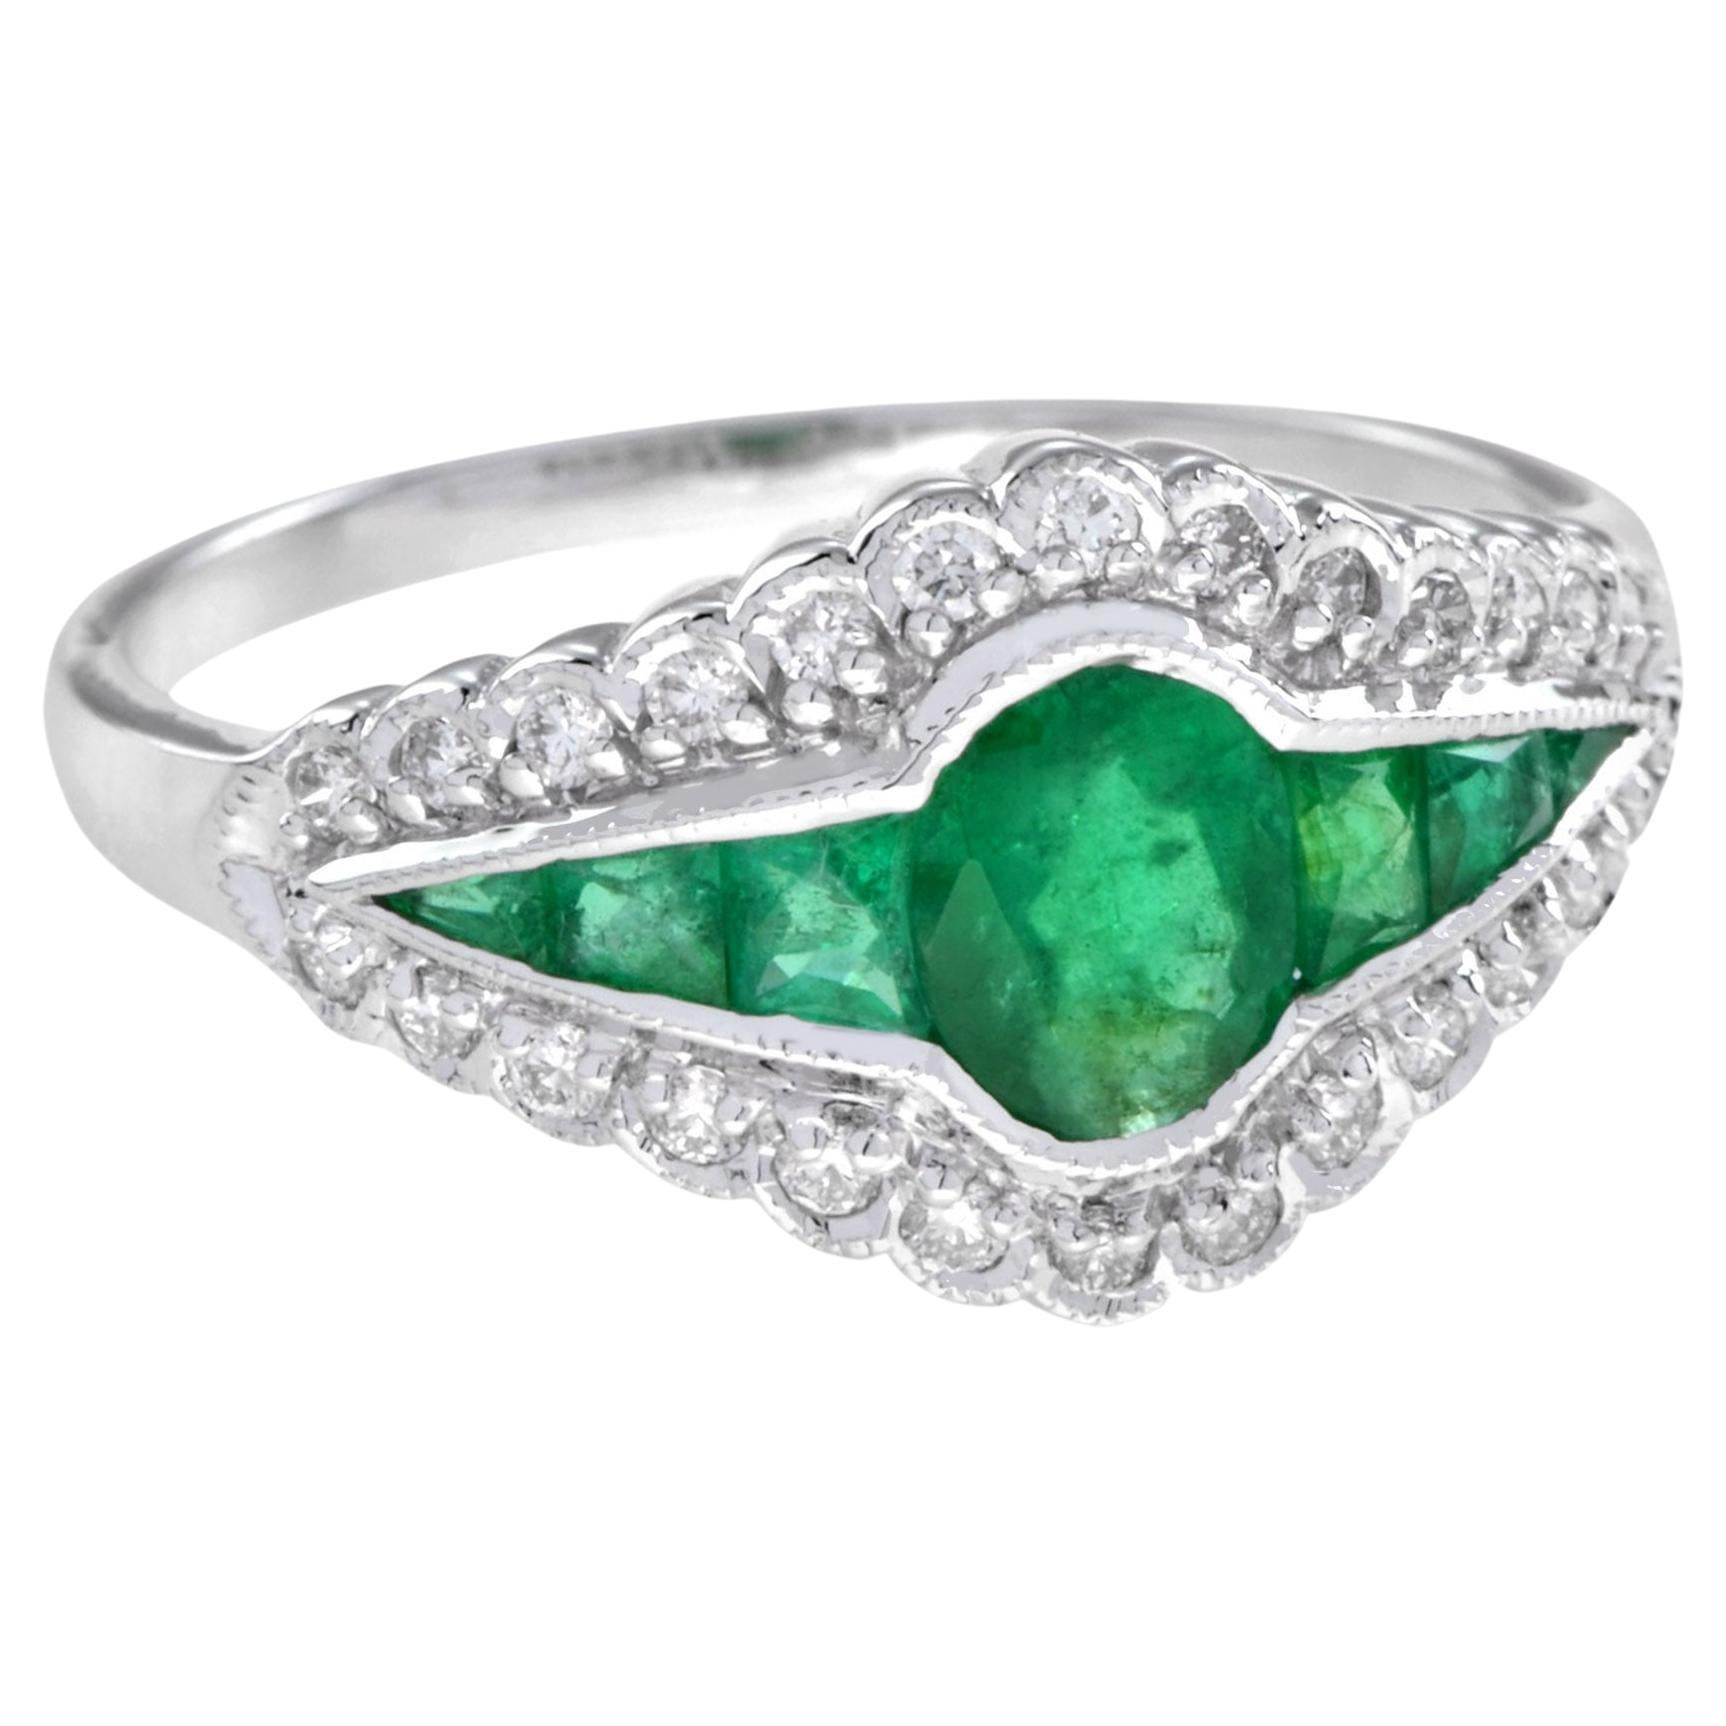 Catherine Lace Natural Emerald and Diamond Art Deco Style Halo Ring in 18K Gold